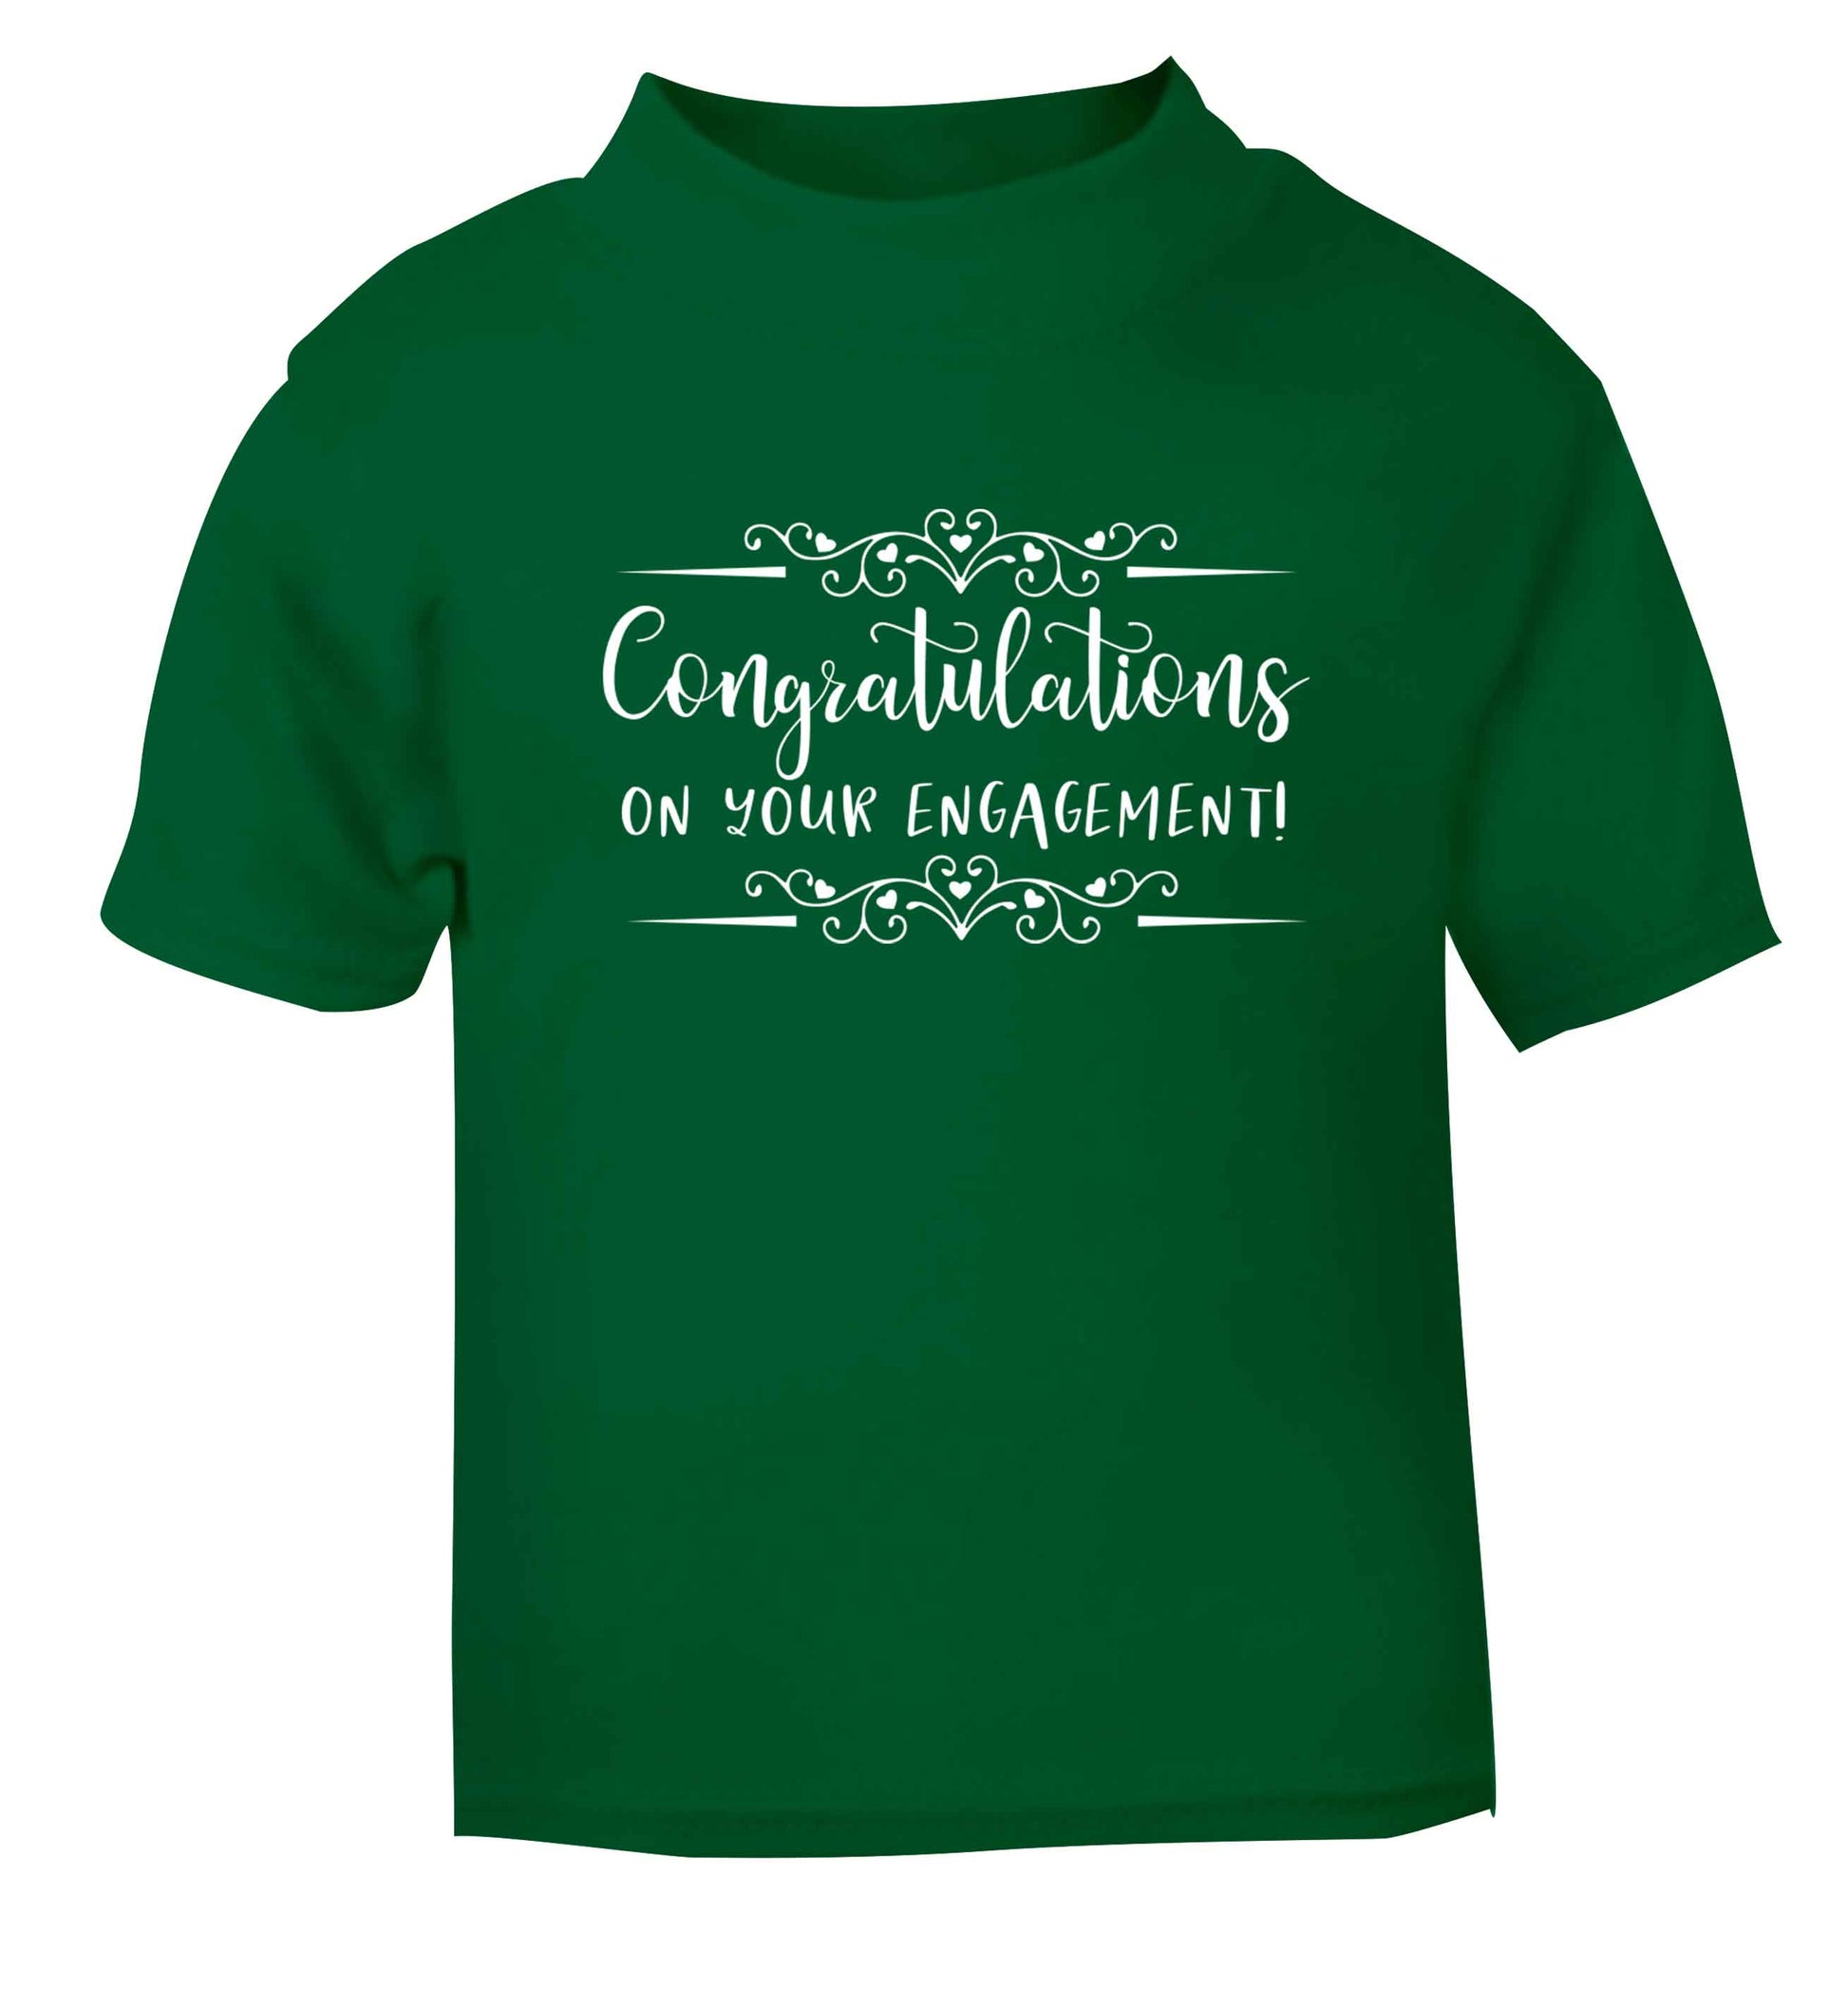 Congratulations on your engagement green baby toddler Tshirt 2 Years